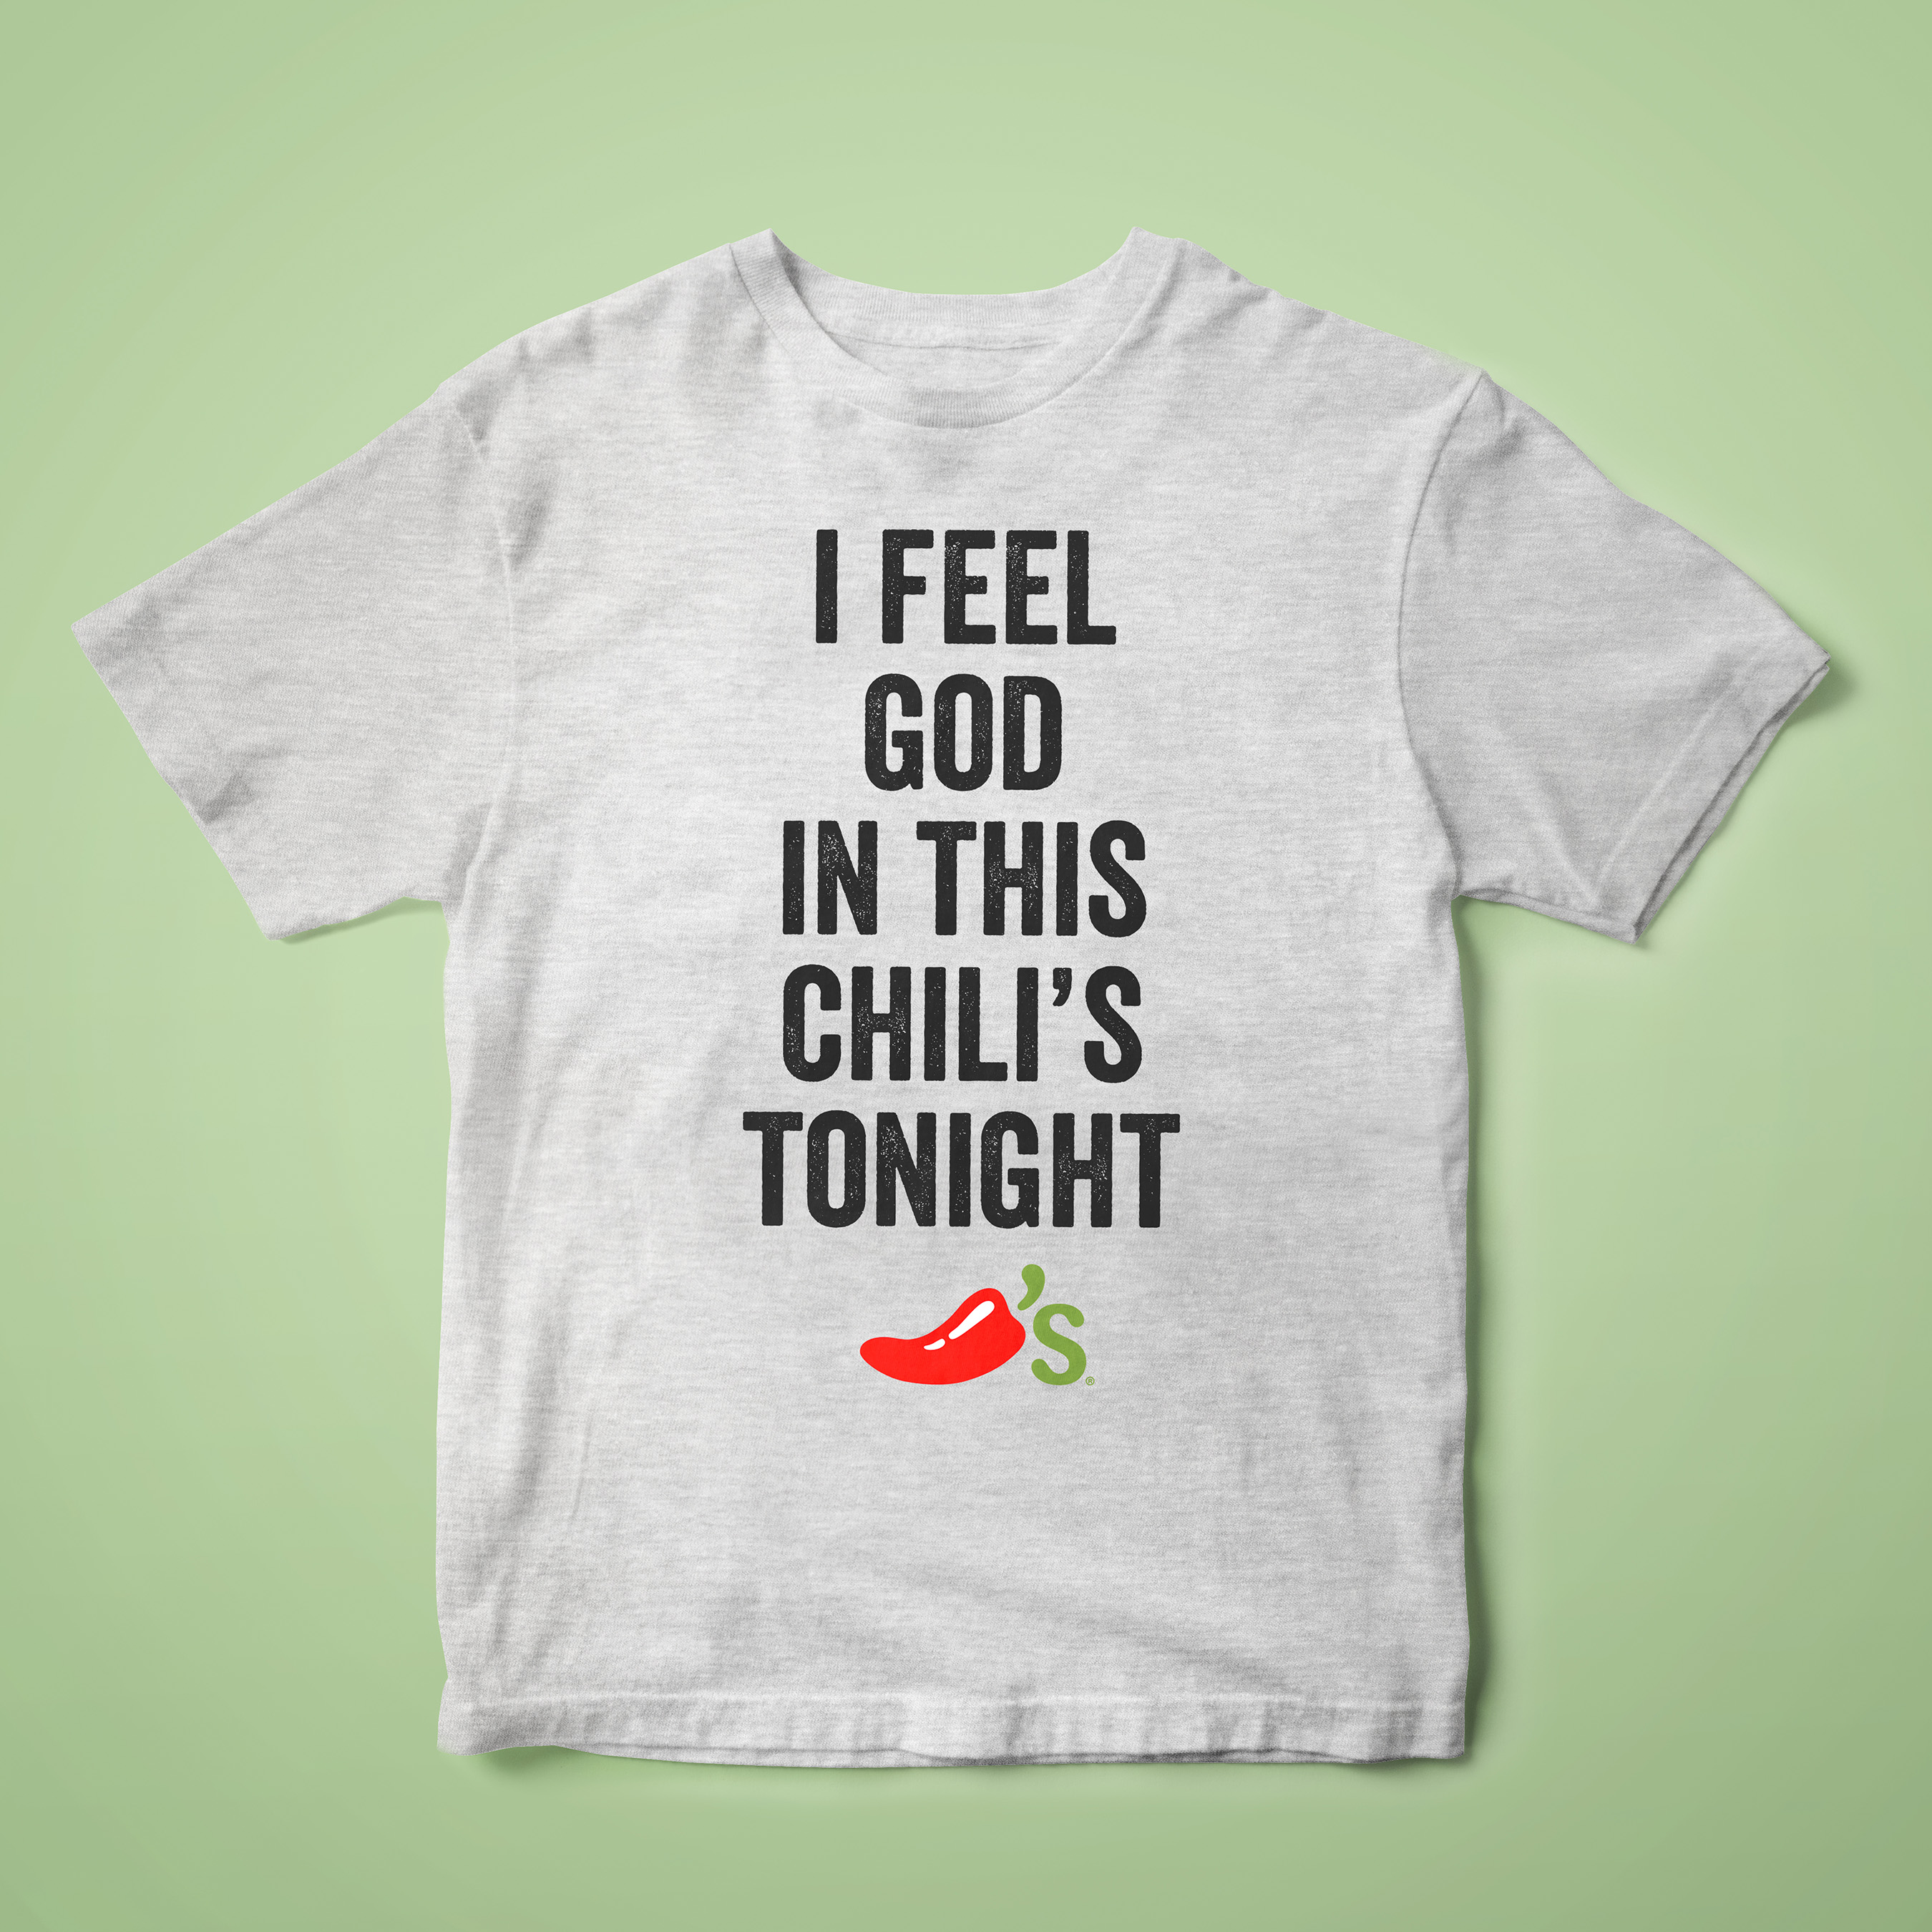 Be the coolest at the water cooler with this tee that fits any occasion and brings with it Dundies-winning potential.